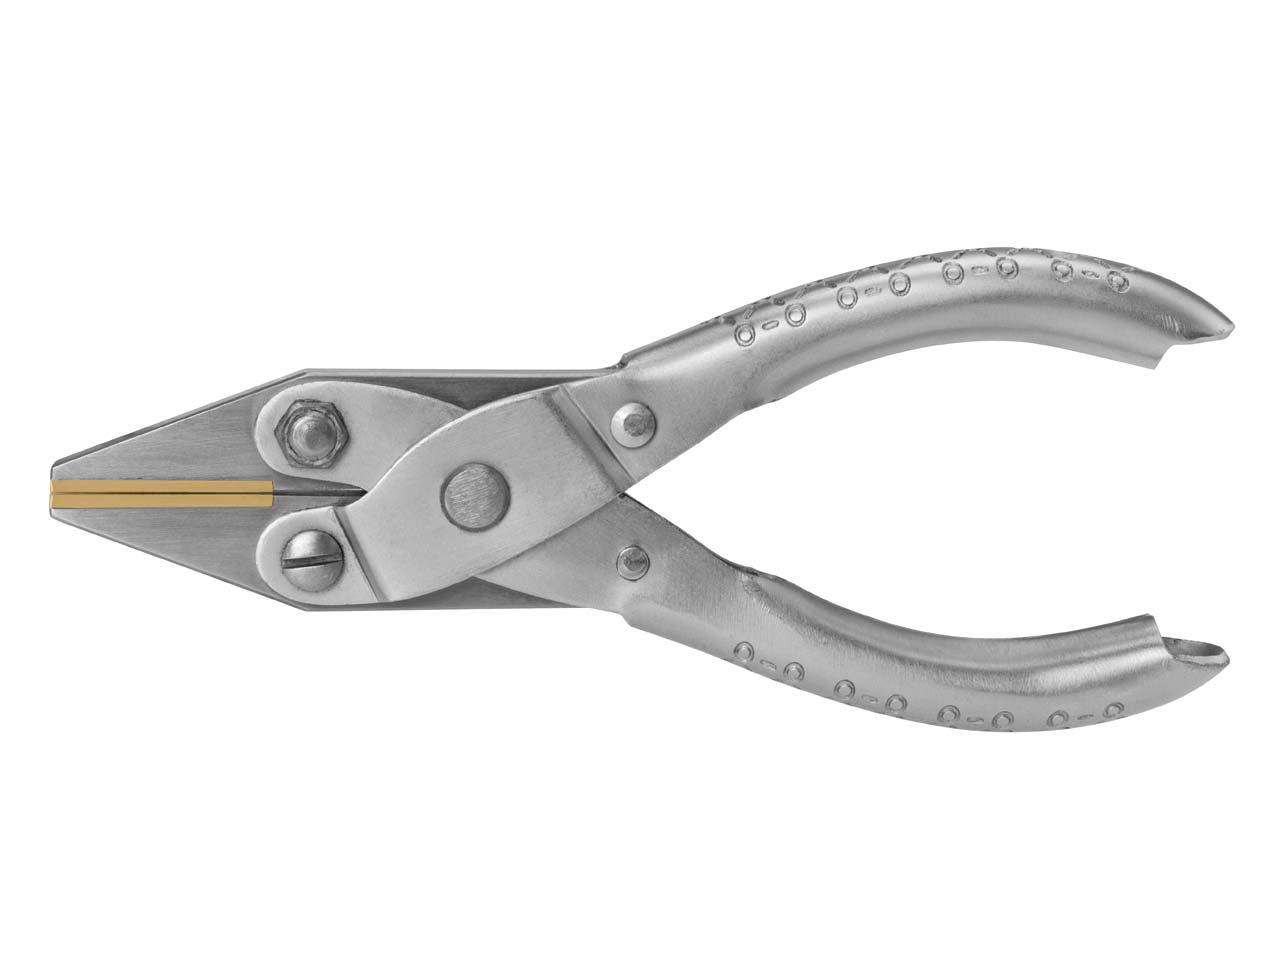 Buy JLS Brass Jaw Parallel Pliers Online at $24.5 - JL Smith & Co